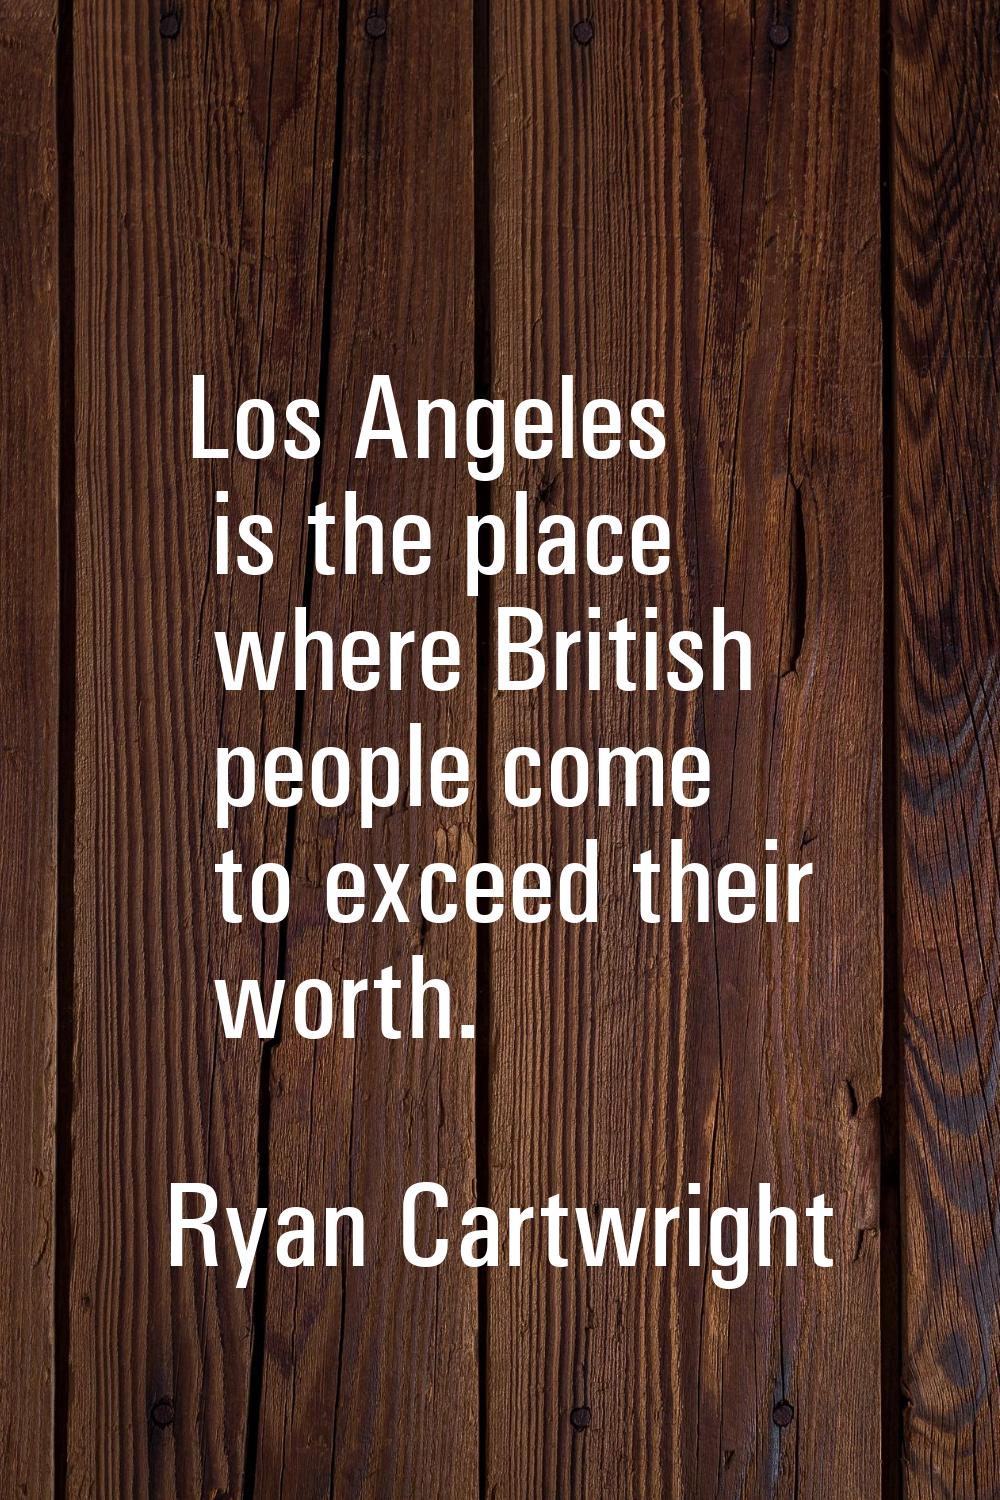 Los Angeles is the place where British people come to exceed their worth.